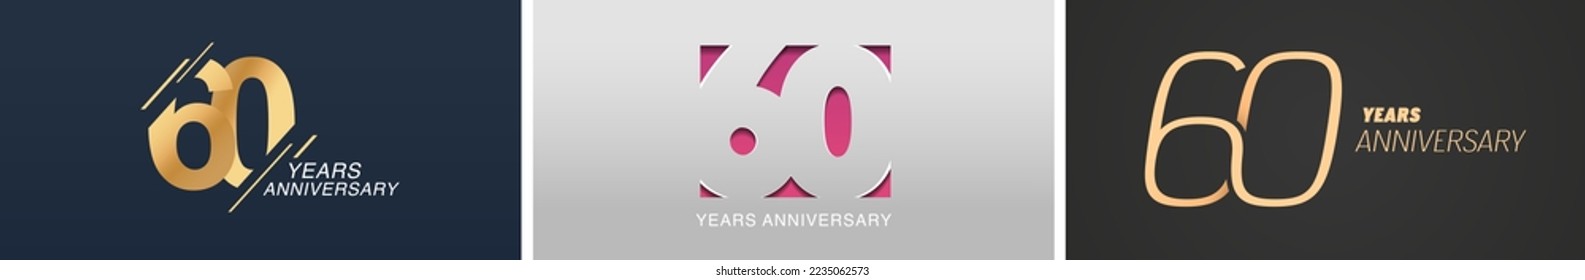 60 years anniversary vector icon, logo. Isolated graphic design set with number for 60th anniversary birthday card or symbol